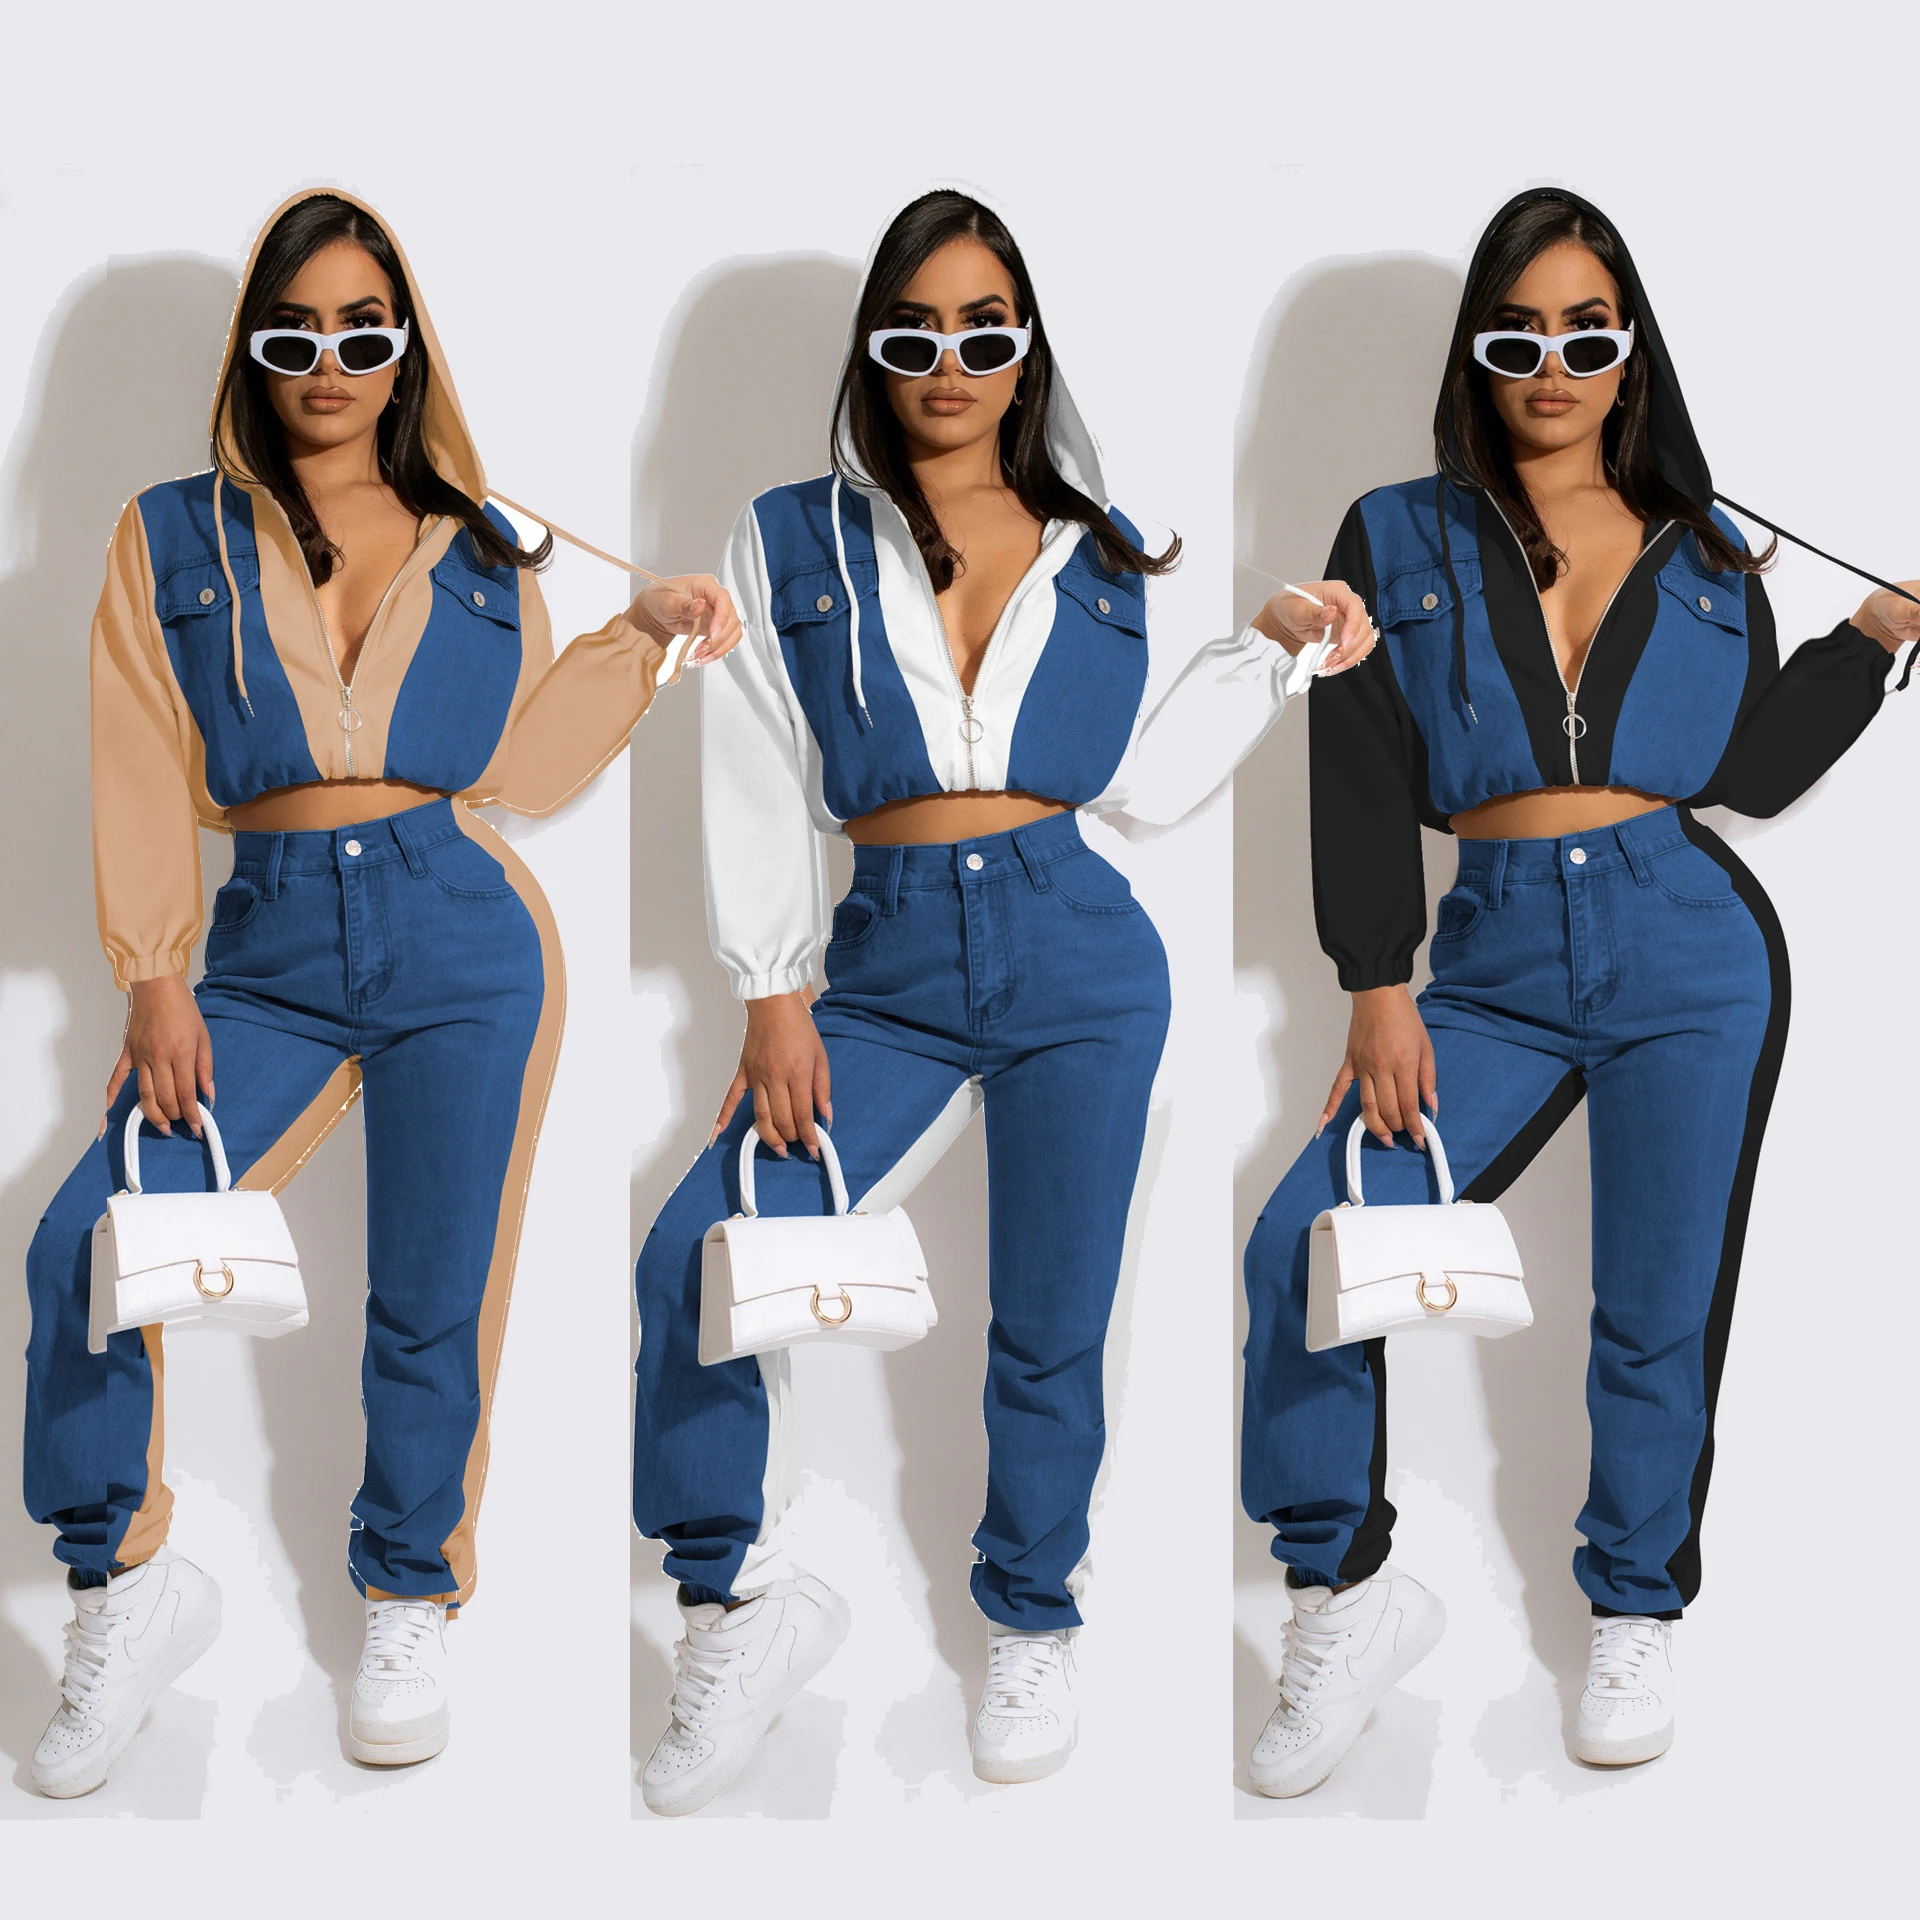 Denim Jacket Hoodie Top Two Piece Sets 2022 Women Fall Winter Clothes Outfit Y2K Streetwear Cropped Coat Jackets 2 Pieces Set denim jumpsuit women s 2022 summer invisible open crotch fashion waist controlled workwear one piece shorts cropped jeans pants